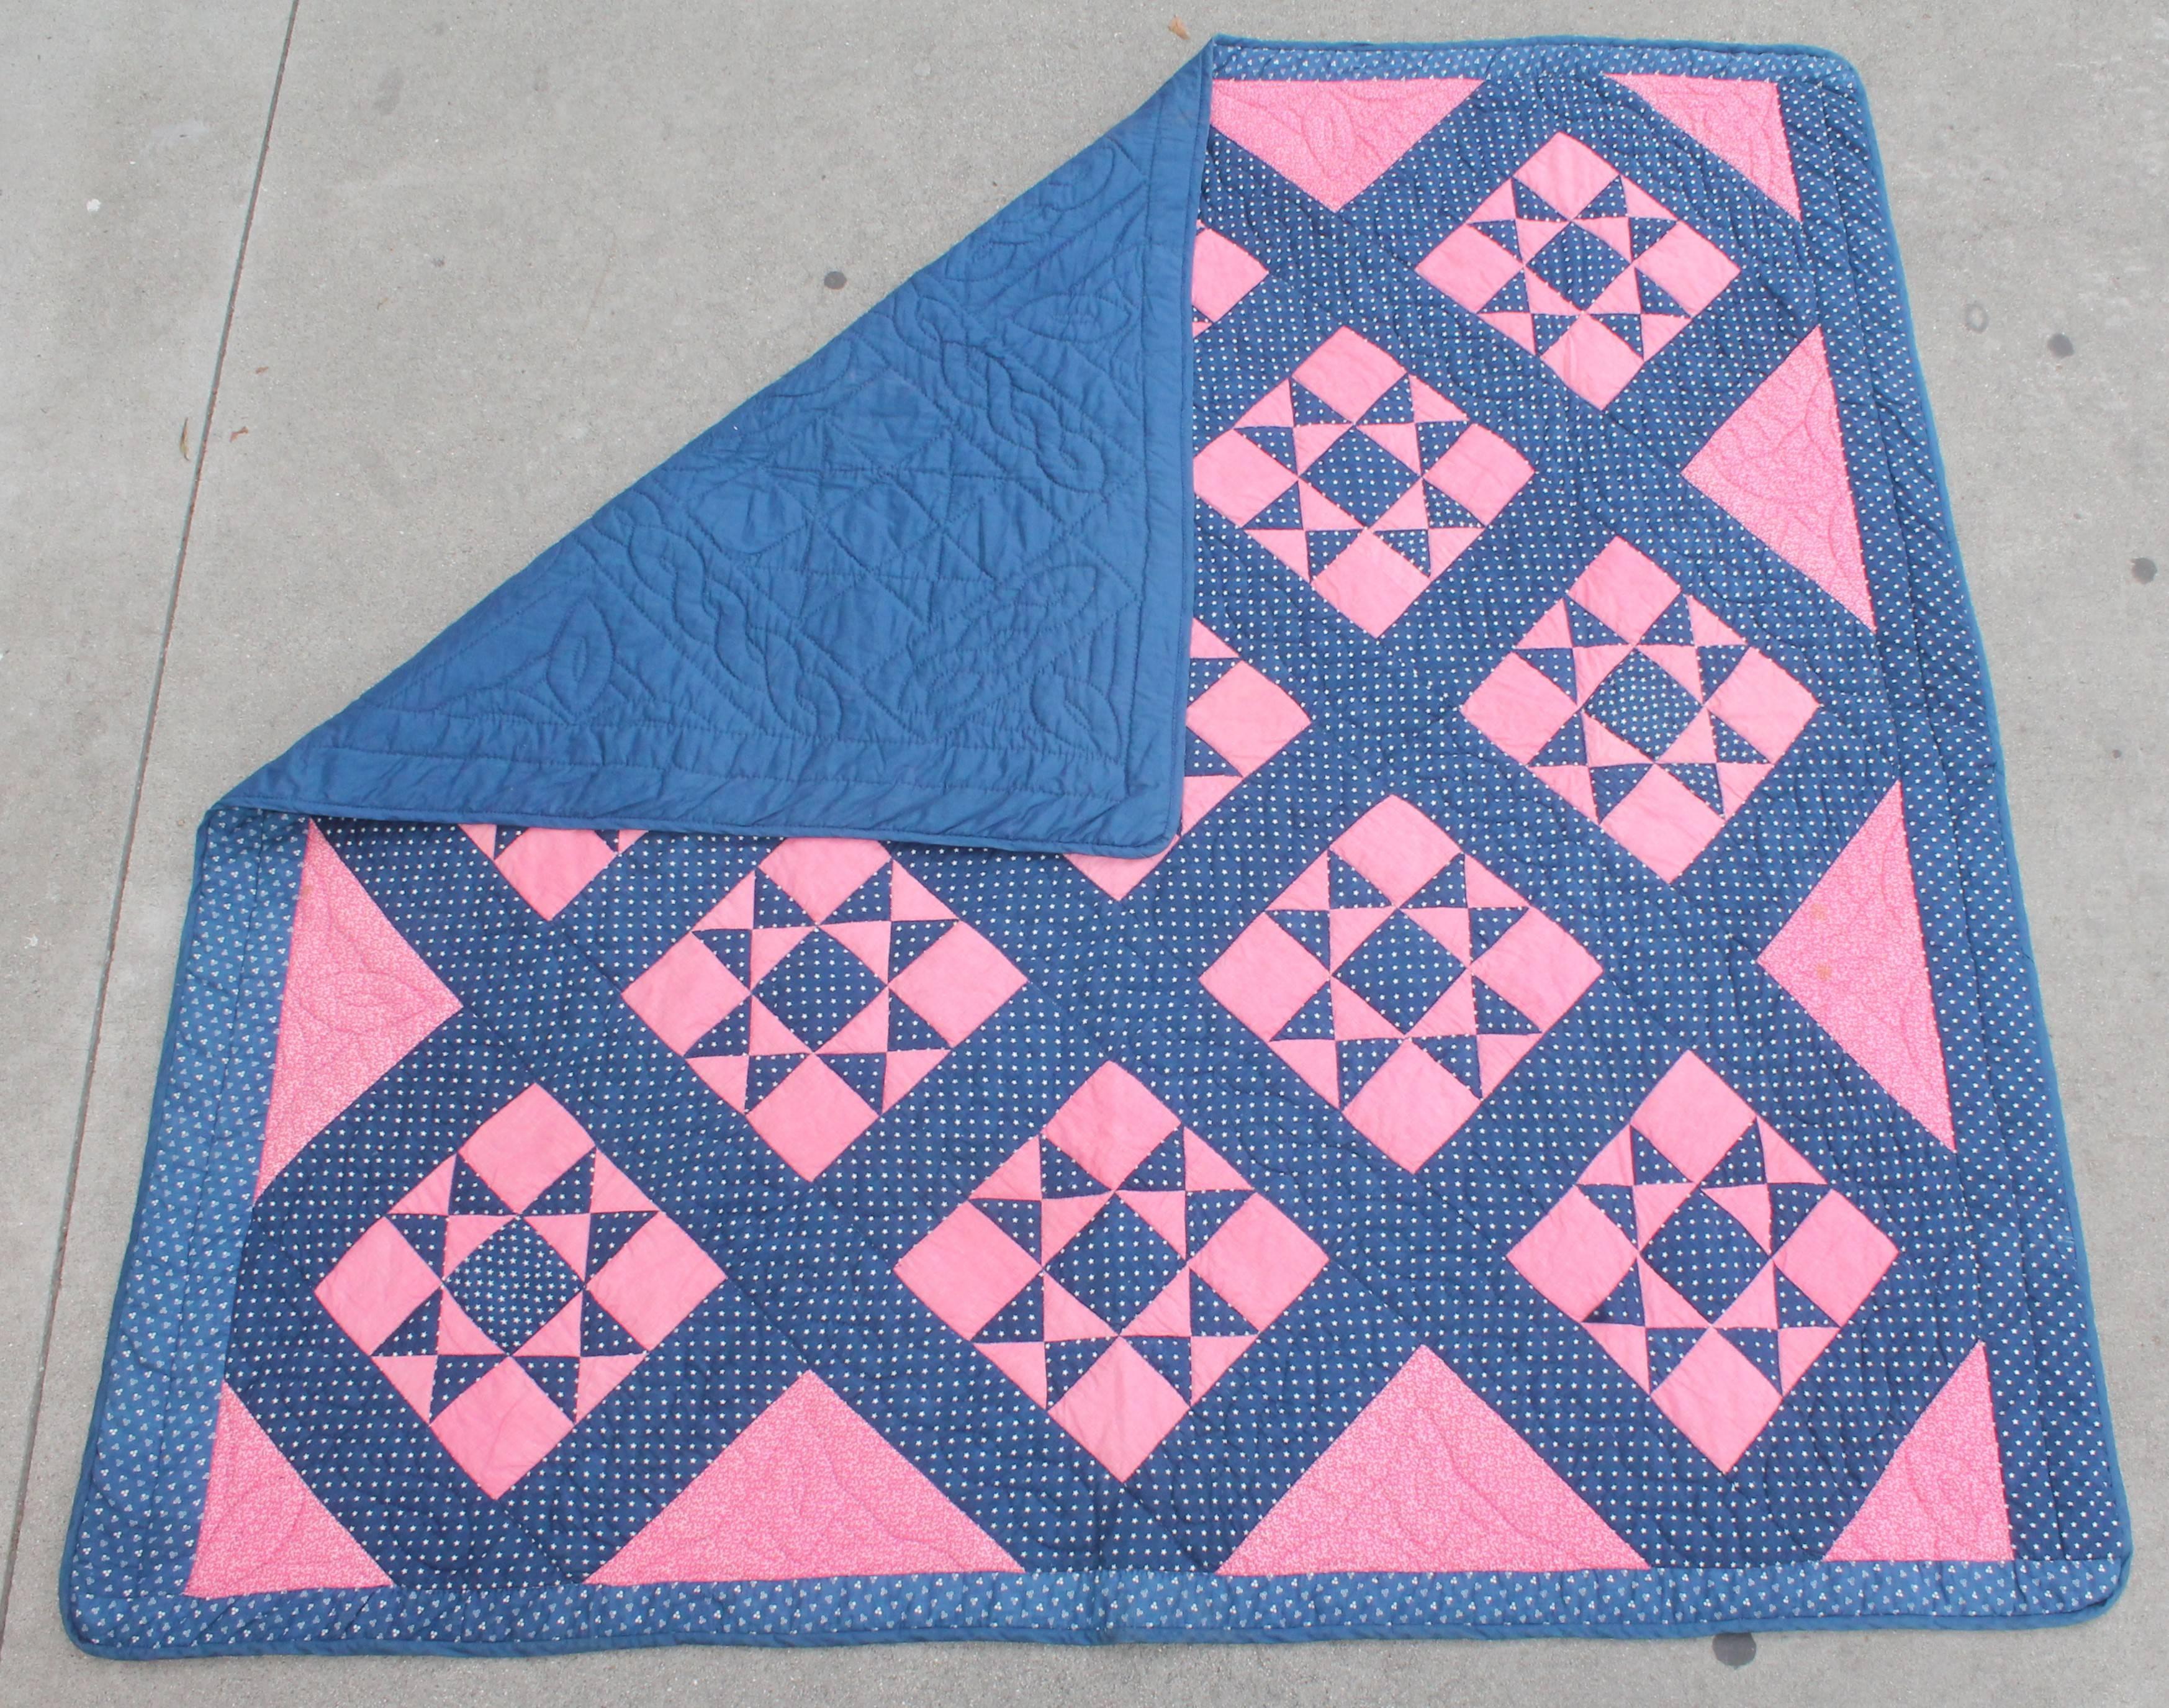 19th century blue calico and pink calico eight point star. Very nice tight quilting and piecing.